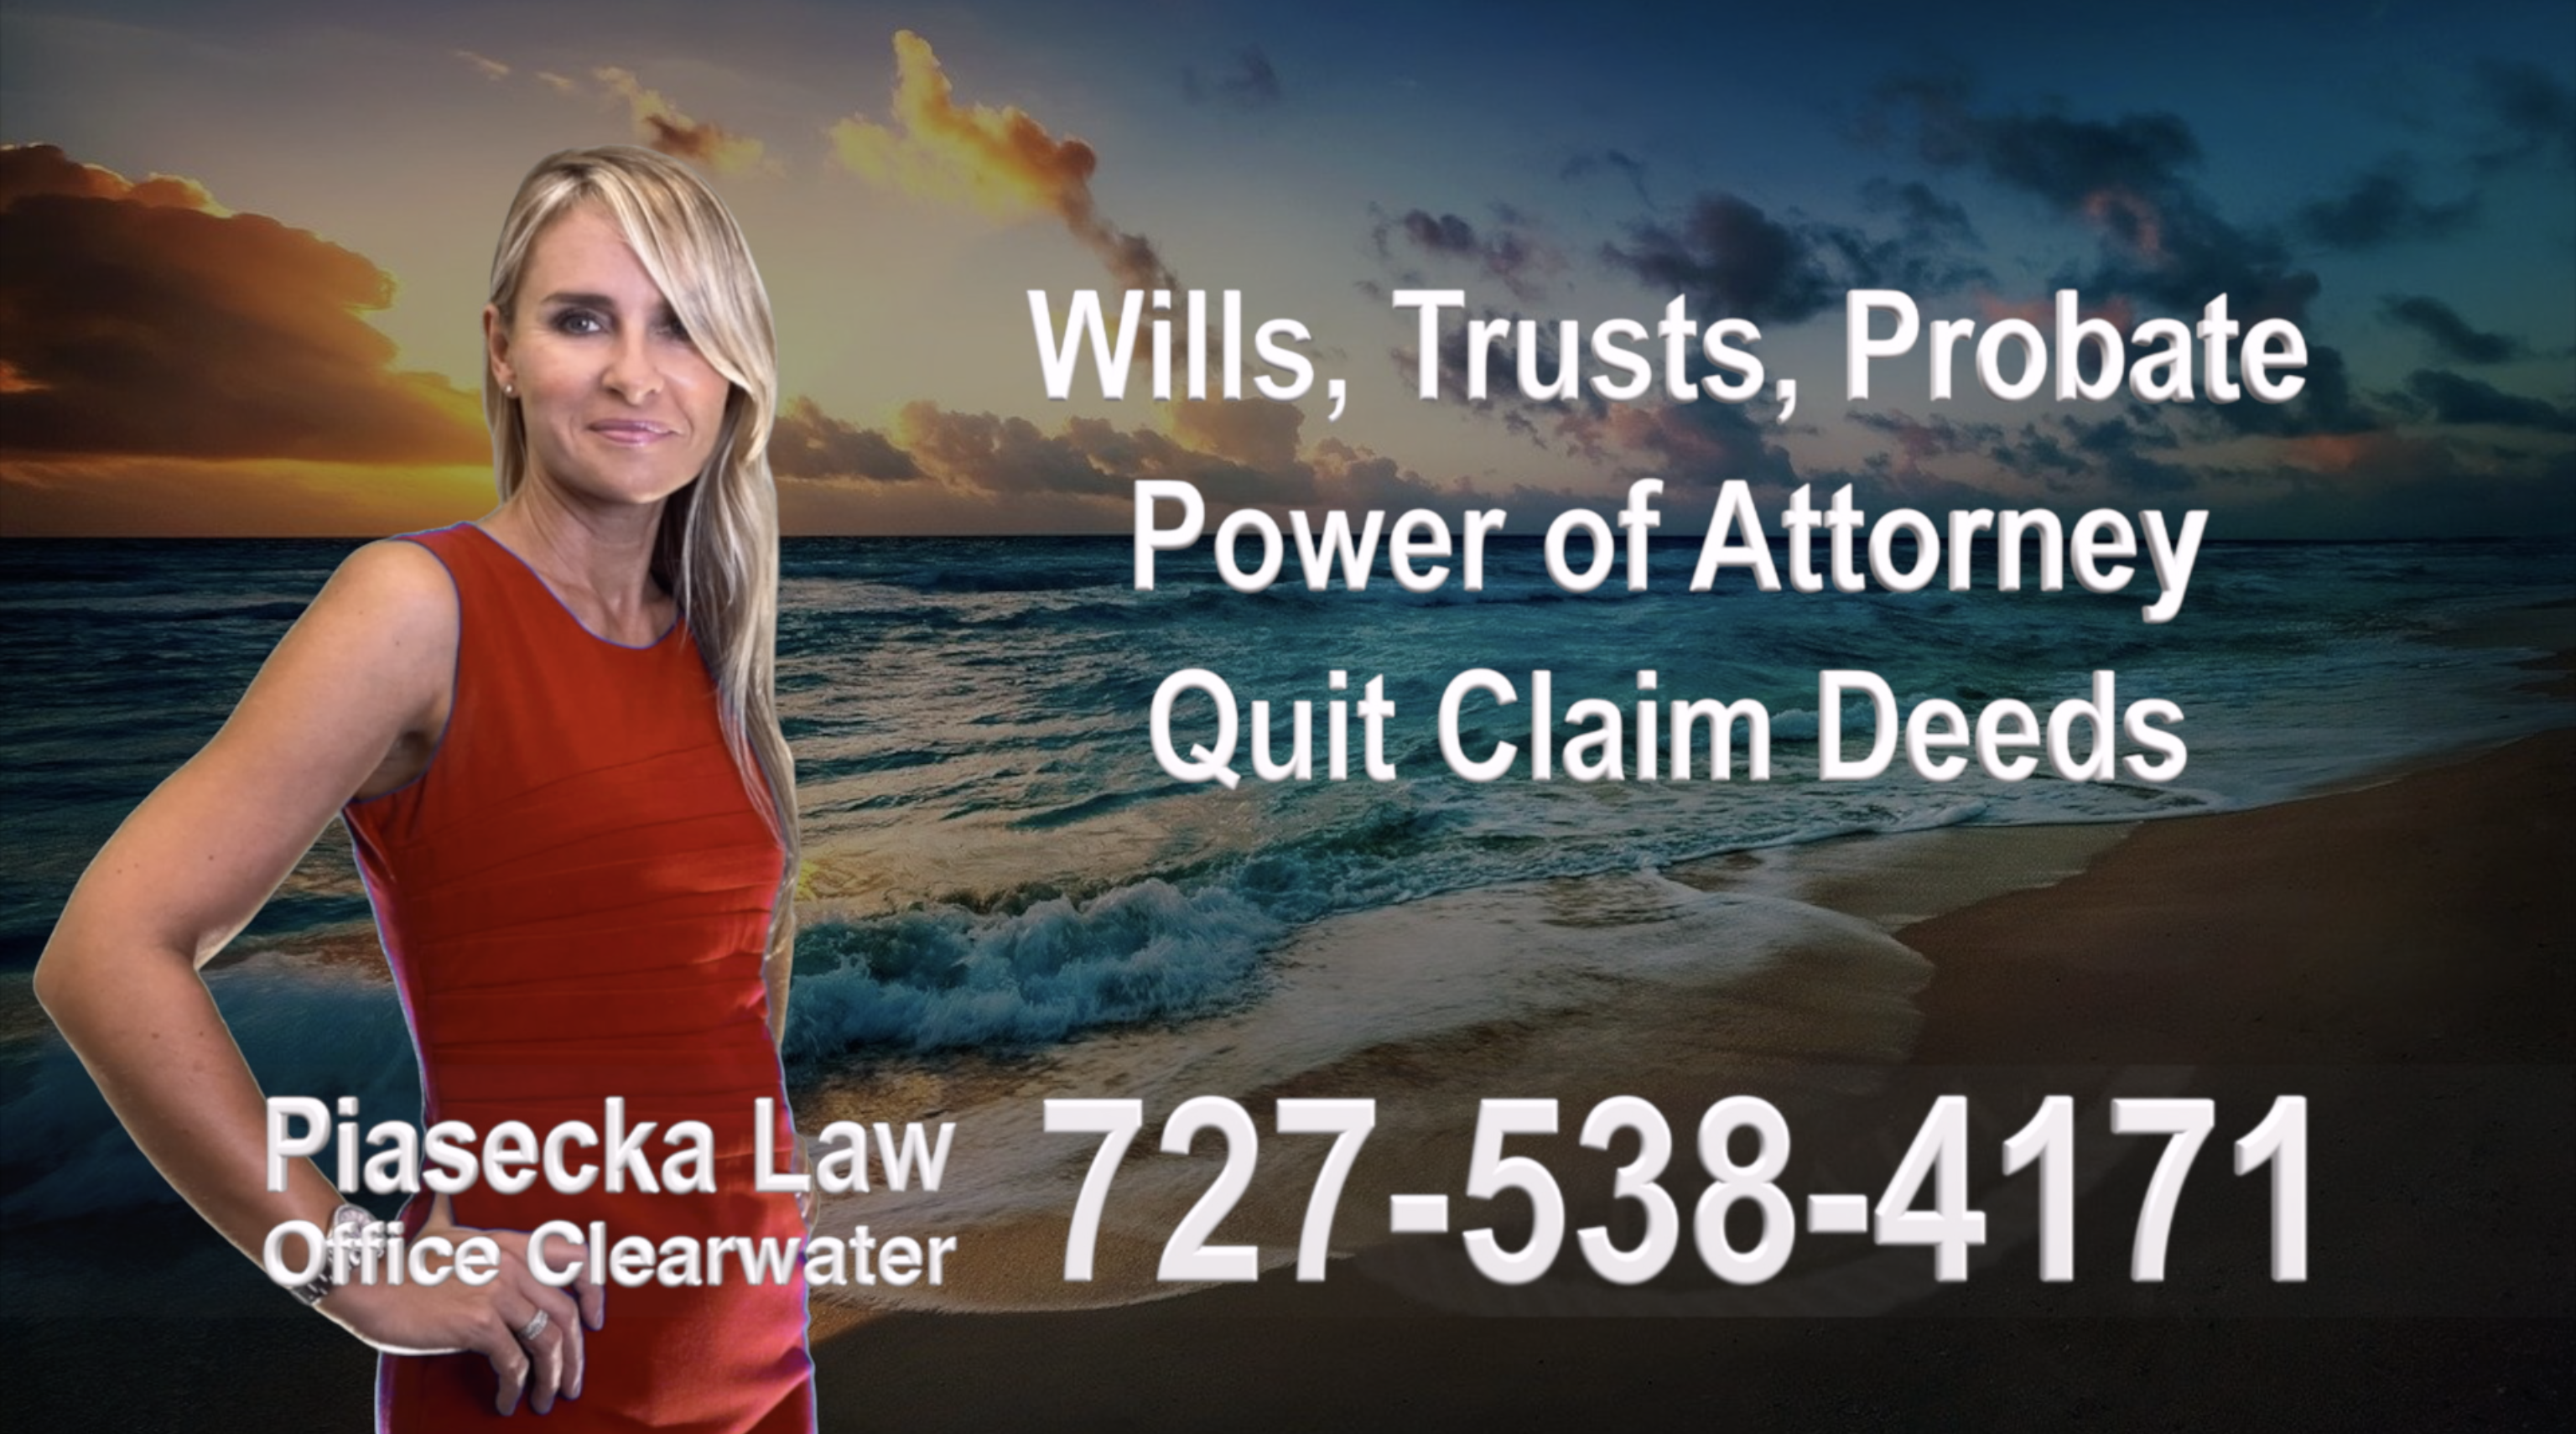 Agnieszka Piasecka Law, Wills, Trusts, Clearwater, Florida, Probate, Quit Claim Deeds, Power of Attorney, Attorney, Lawyer, Agnieszka Piasecka, Aga Piasecka, Piasecka, 9